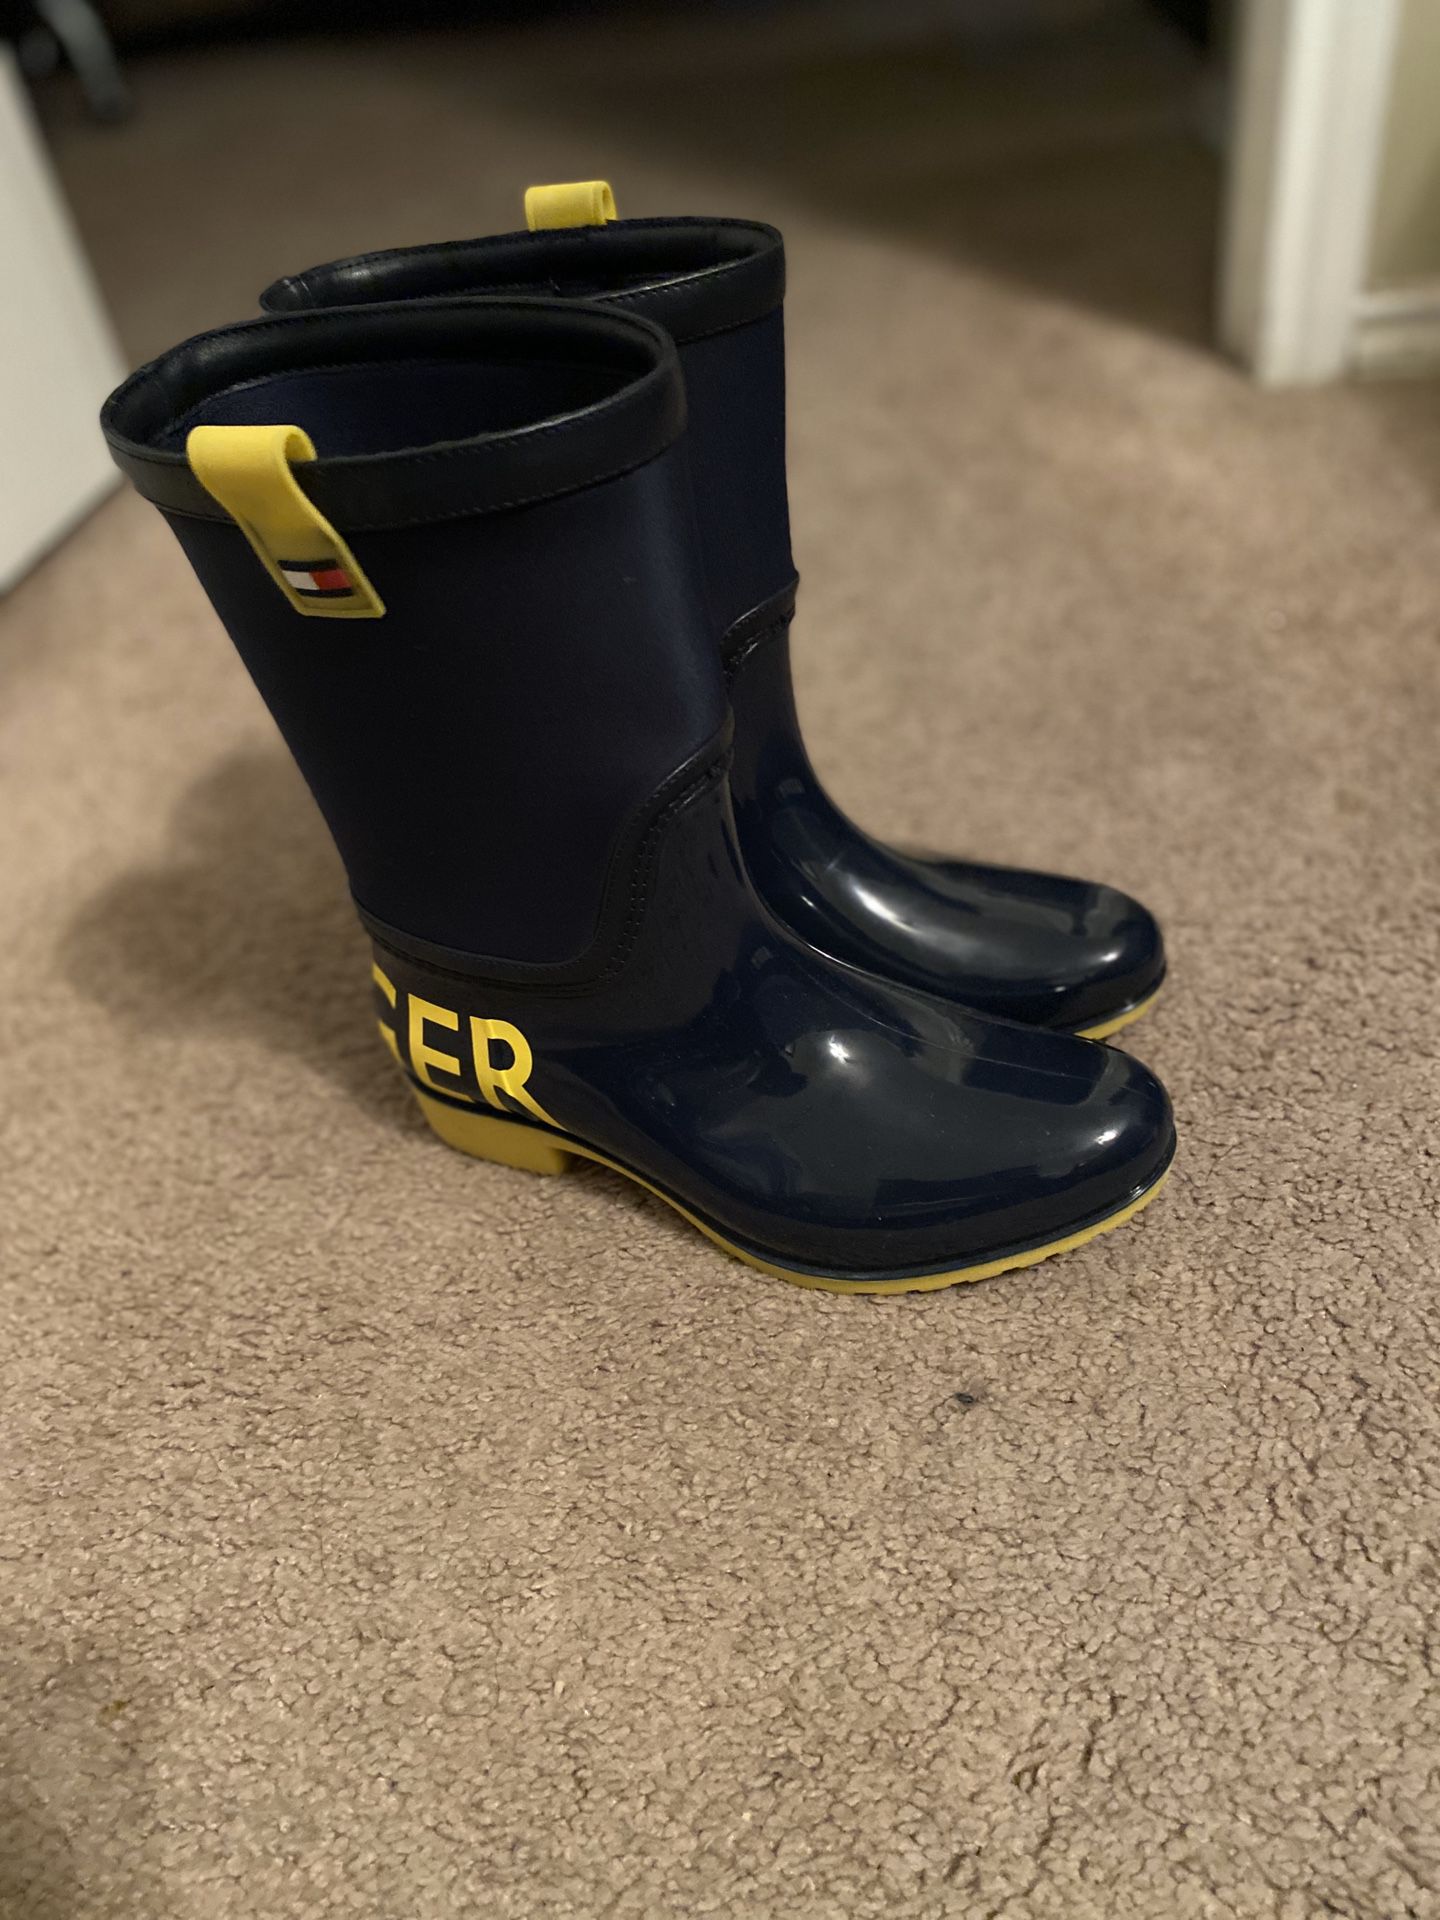 Woman’s Tommy Hilfighter Rain Boots - Size 7M